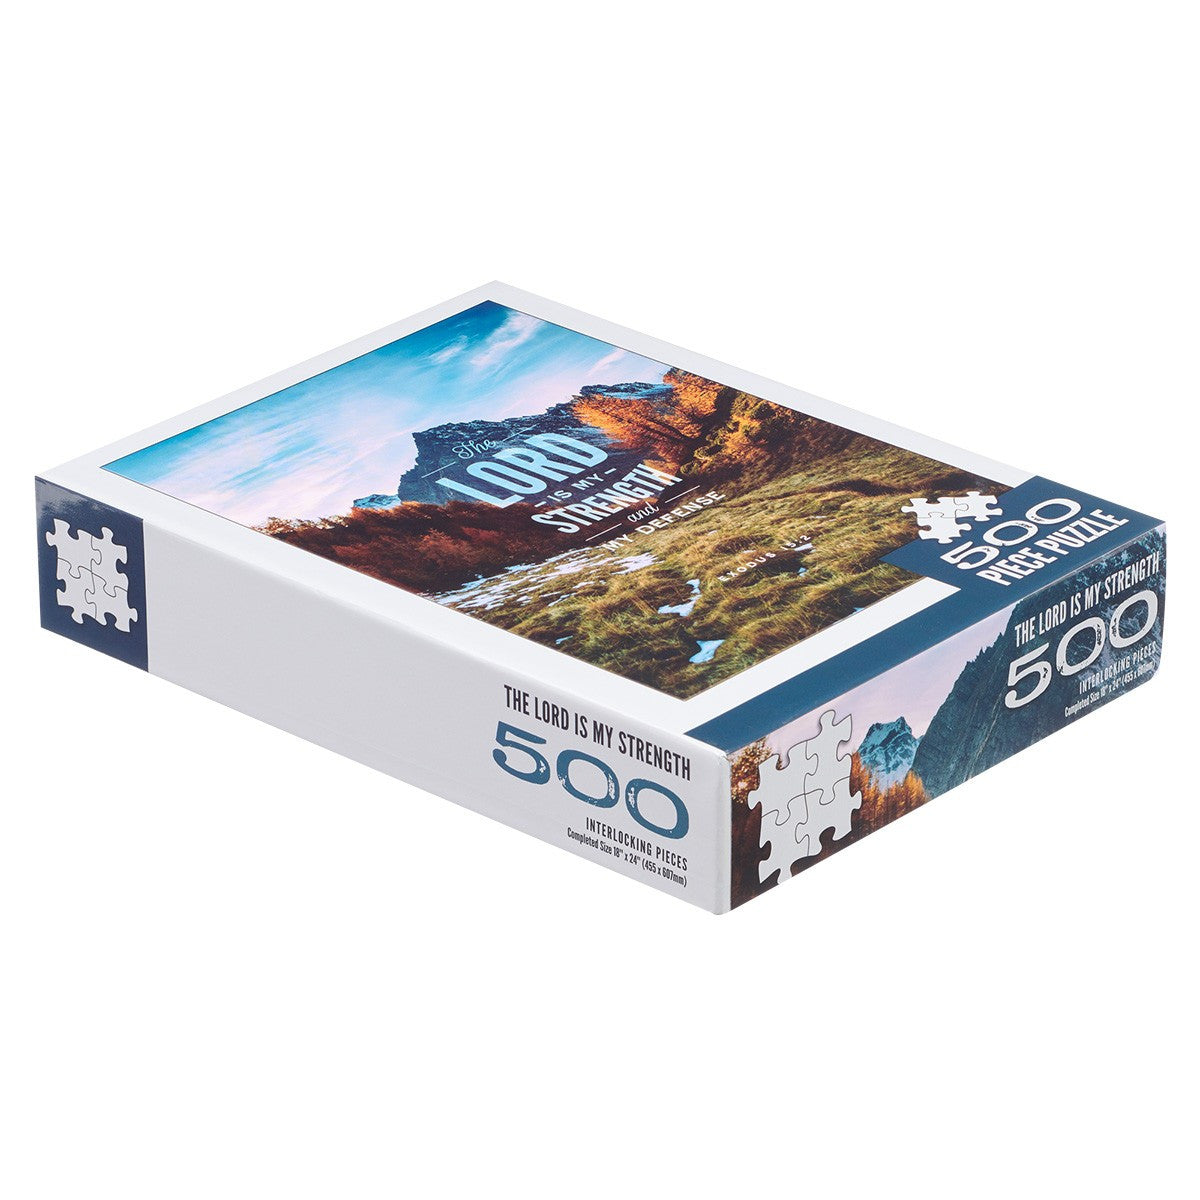 Strength & Defense Mountain Top 500-piece Jigsaw Puzzle - Exodus 15:2 - The Christian Gift Company